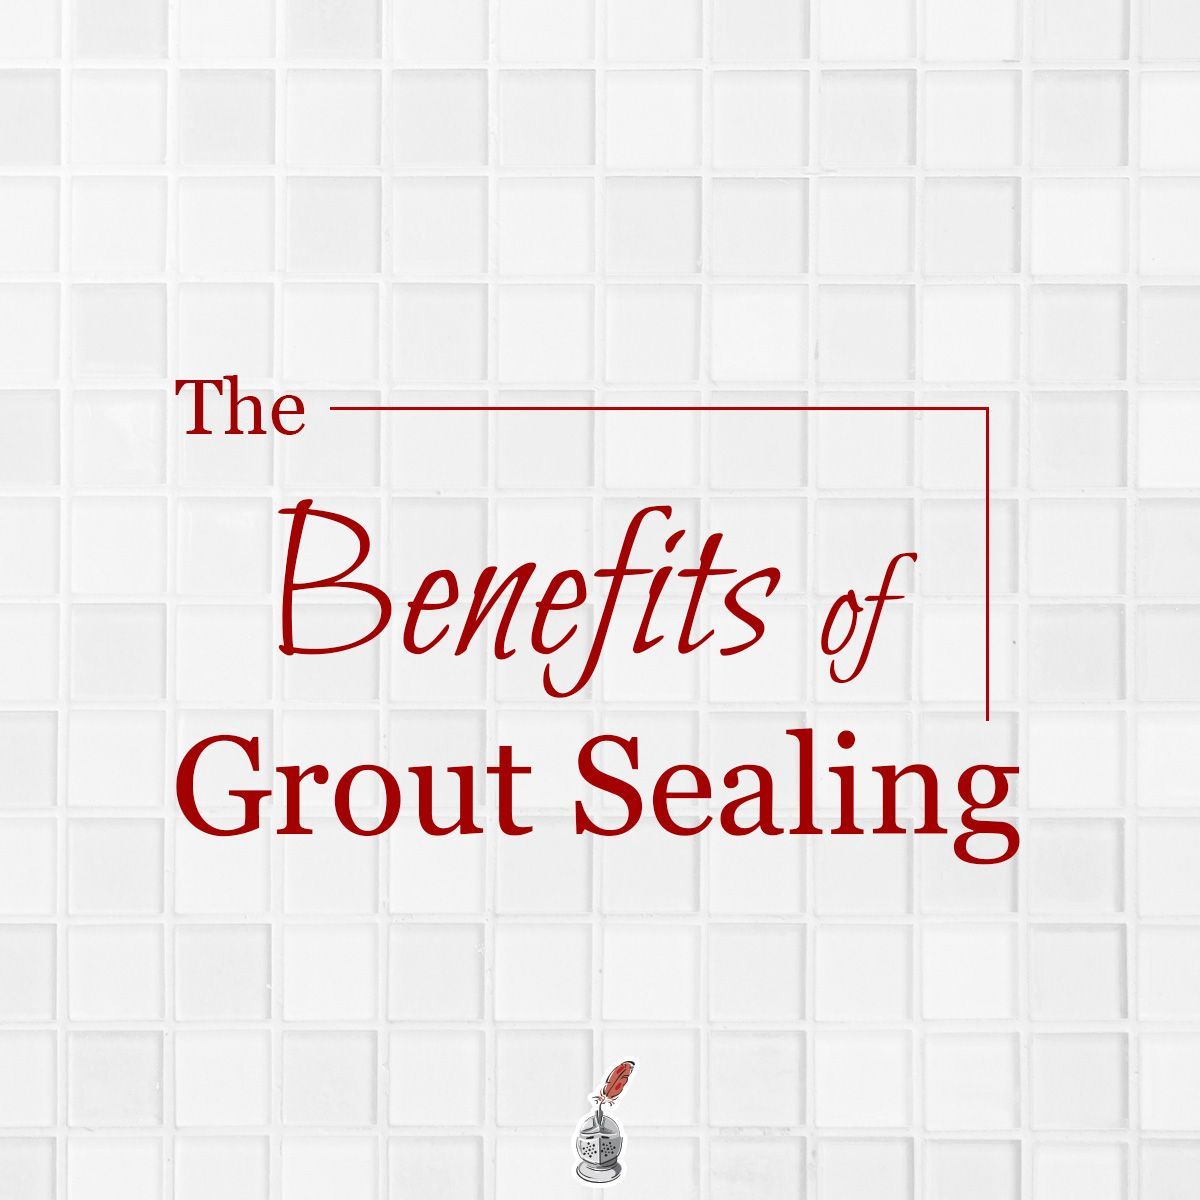 The Benefits of Grout Sealing